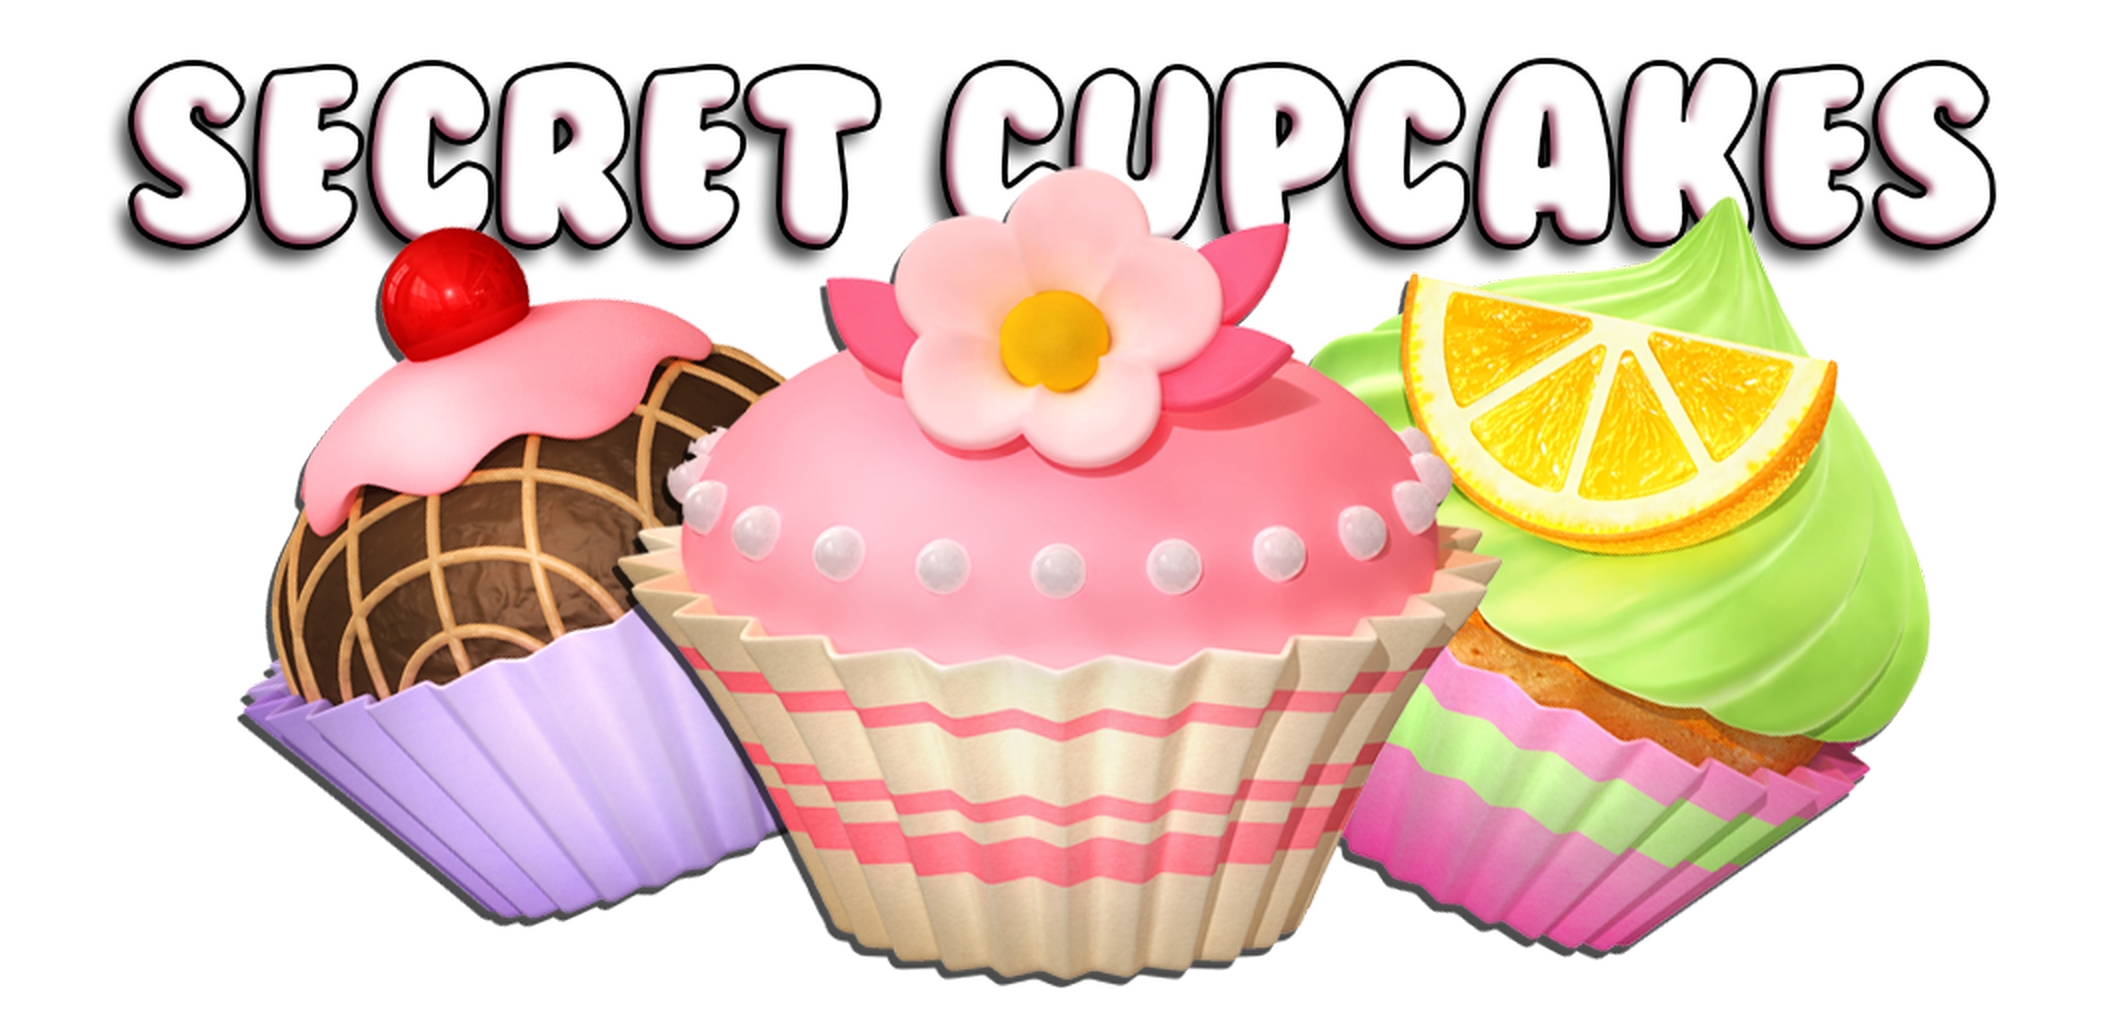 The Secret Cupcakes Online Slot Demo Game by Spinomenal